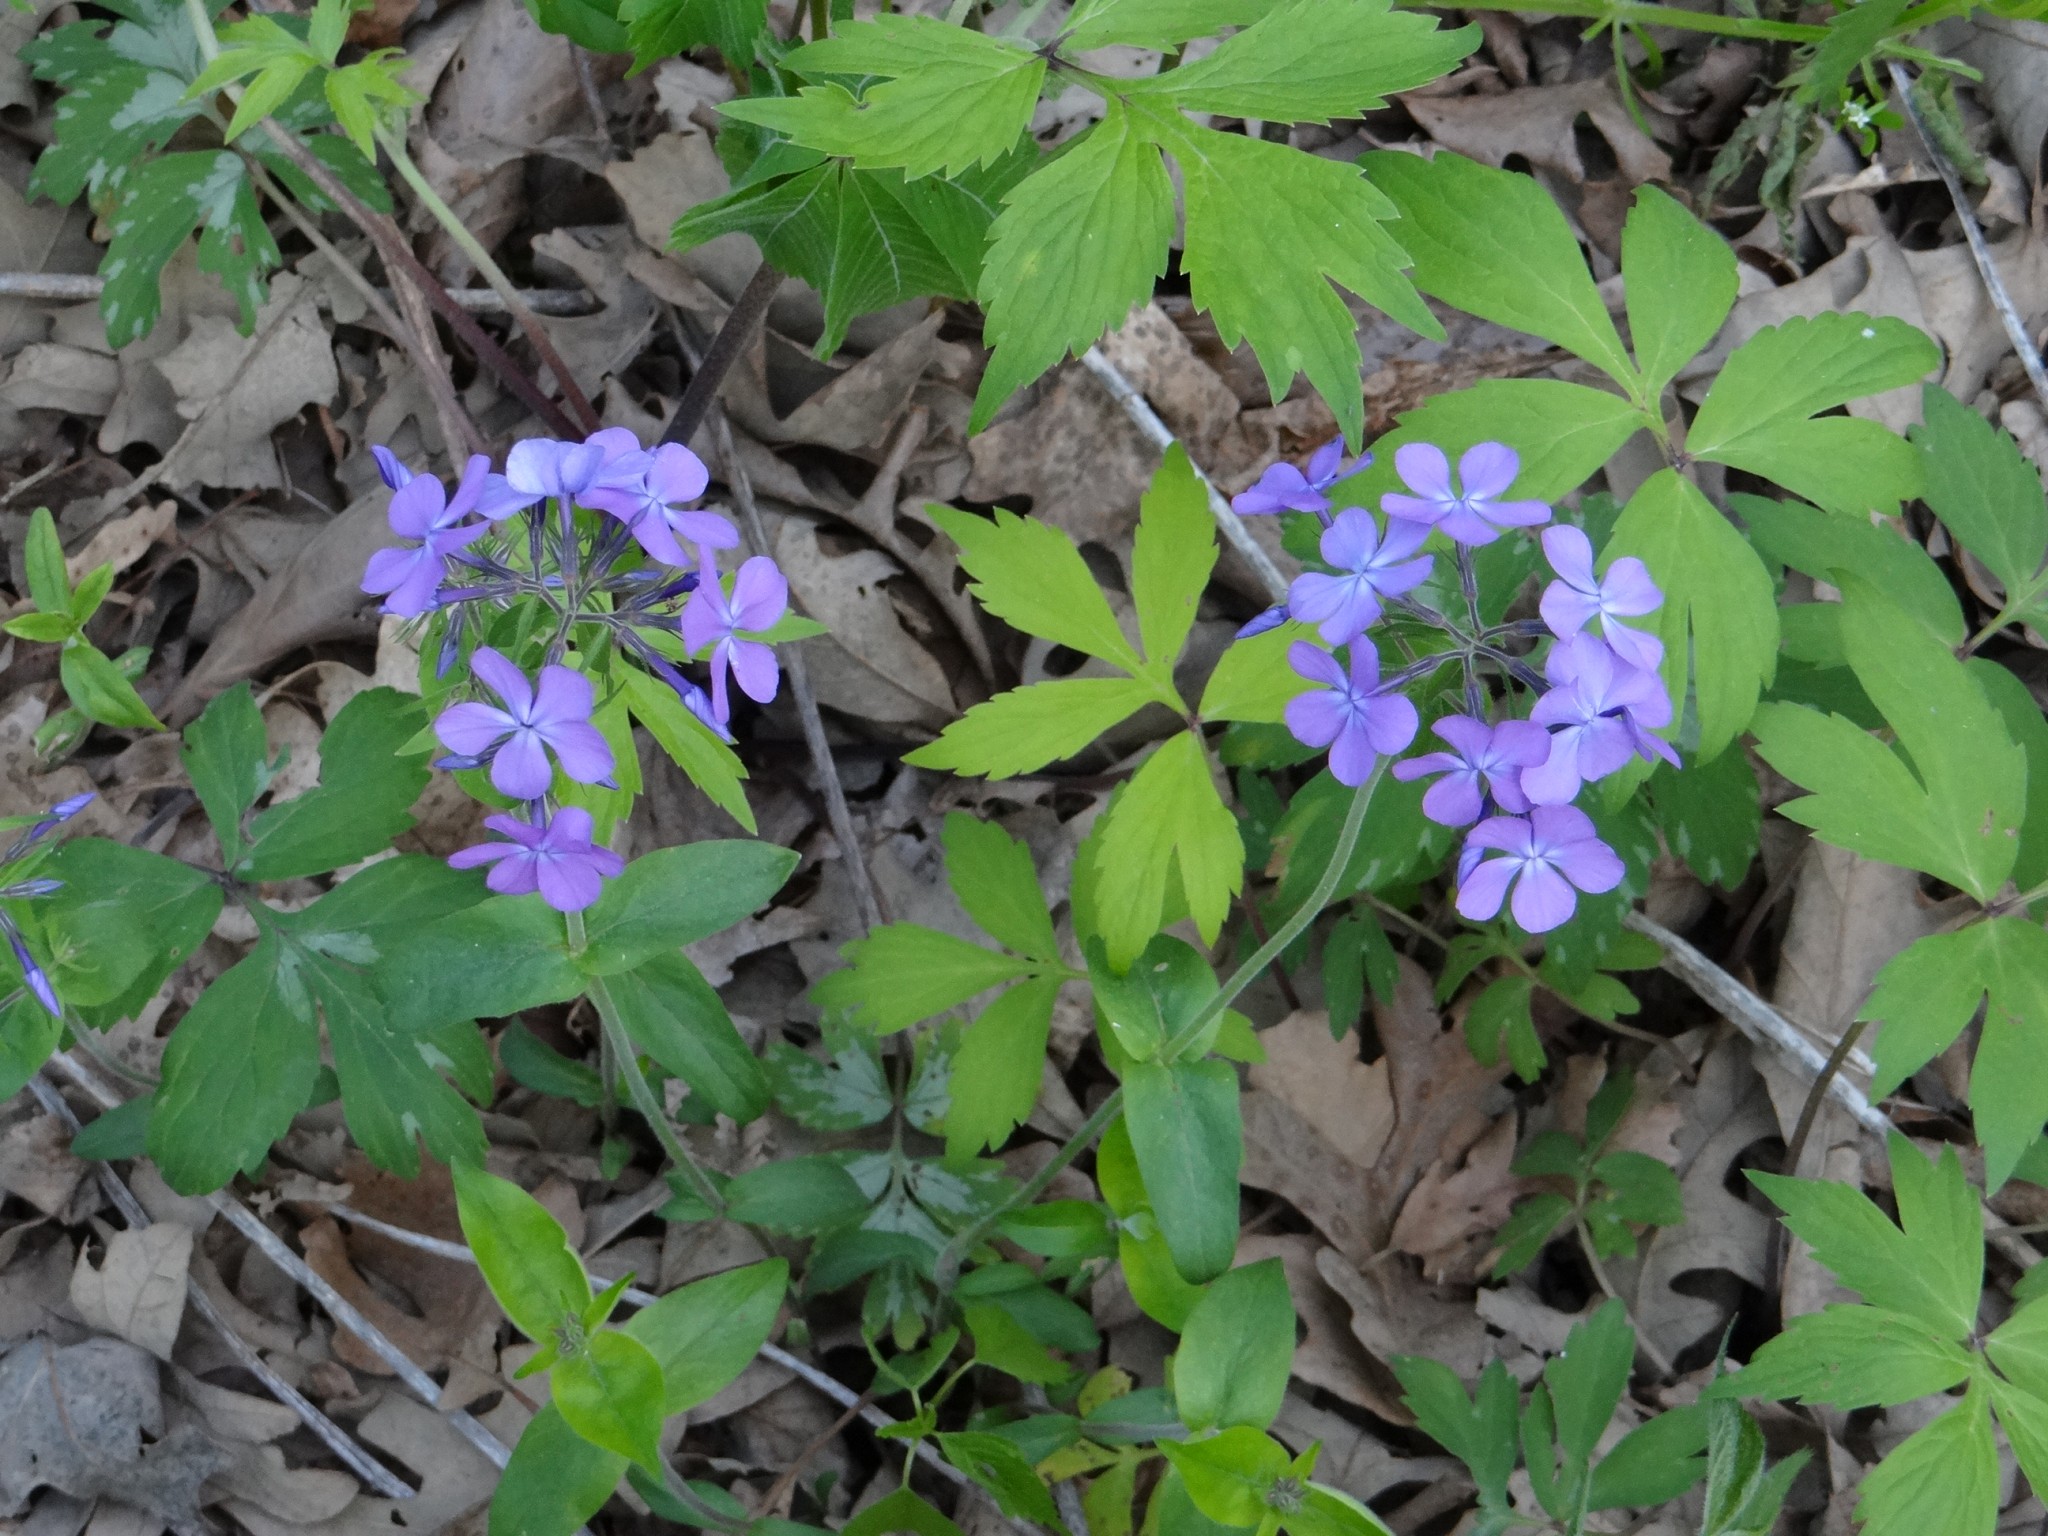 Woodland Phlox in Missouri River woods. Photo by Greg Wagner.